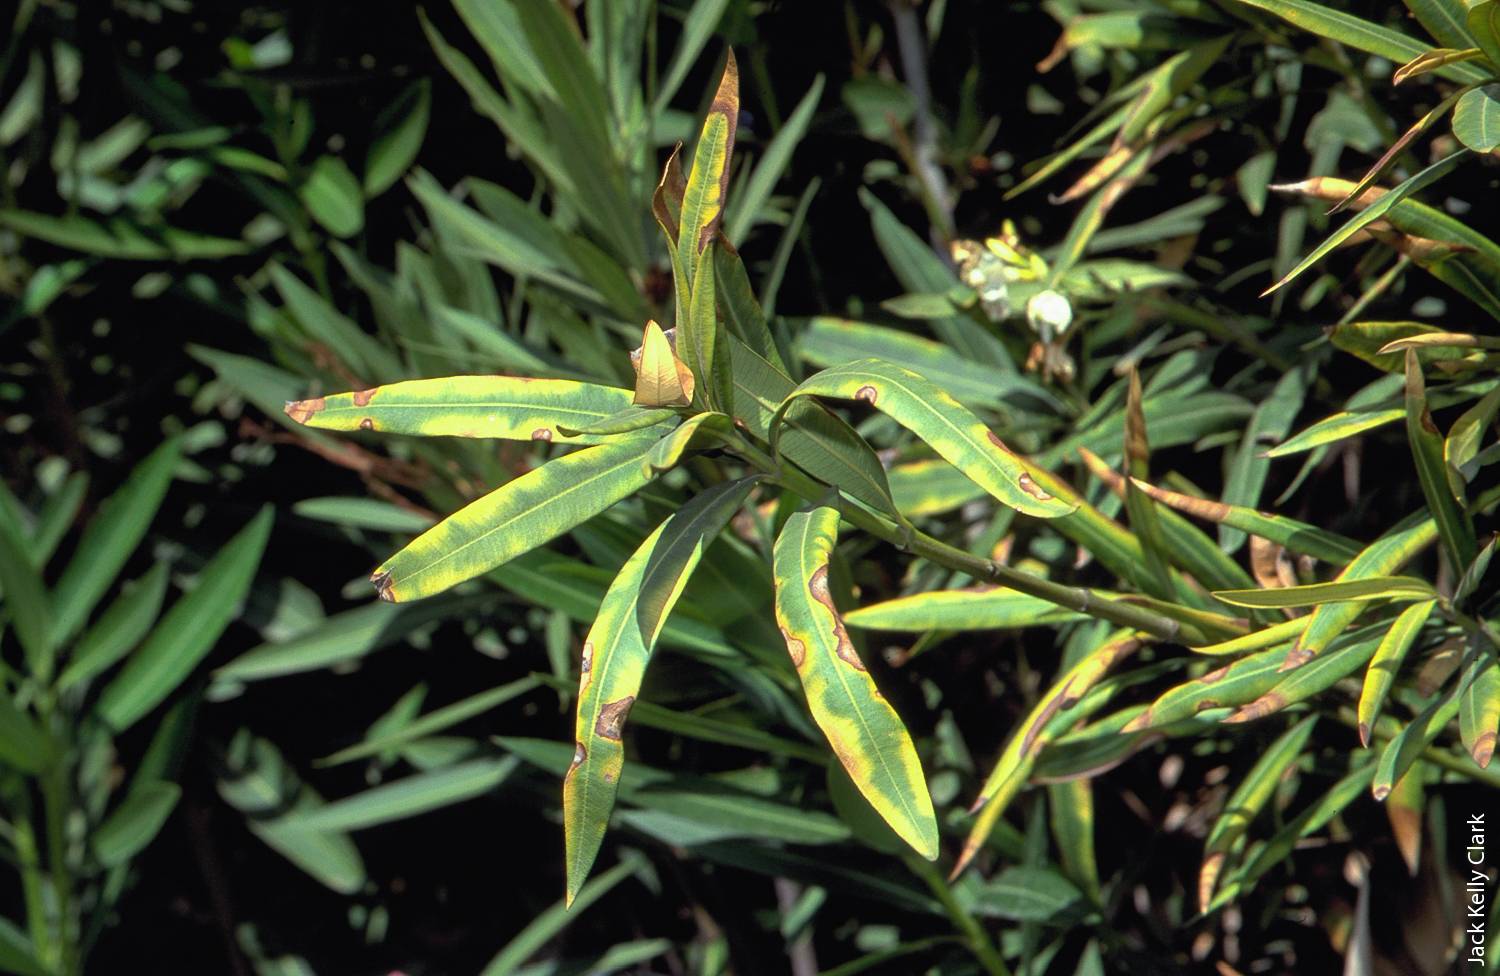 Oleander is a GWSS host. The yellow, brown, dying leaf margins are a symptom of bacterial leaf scorch vectored by GWSS.